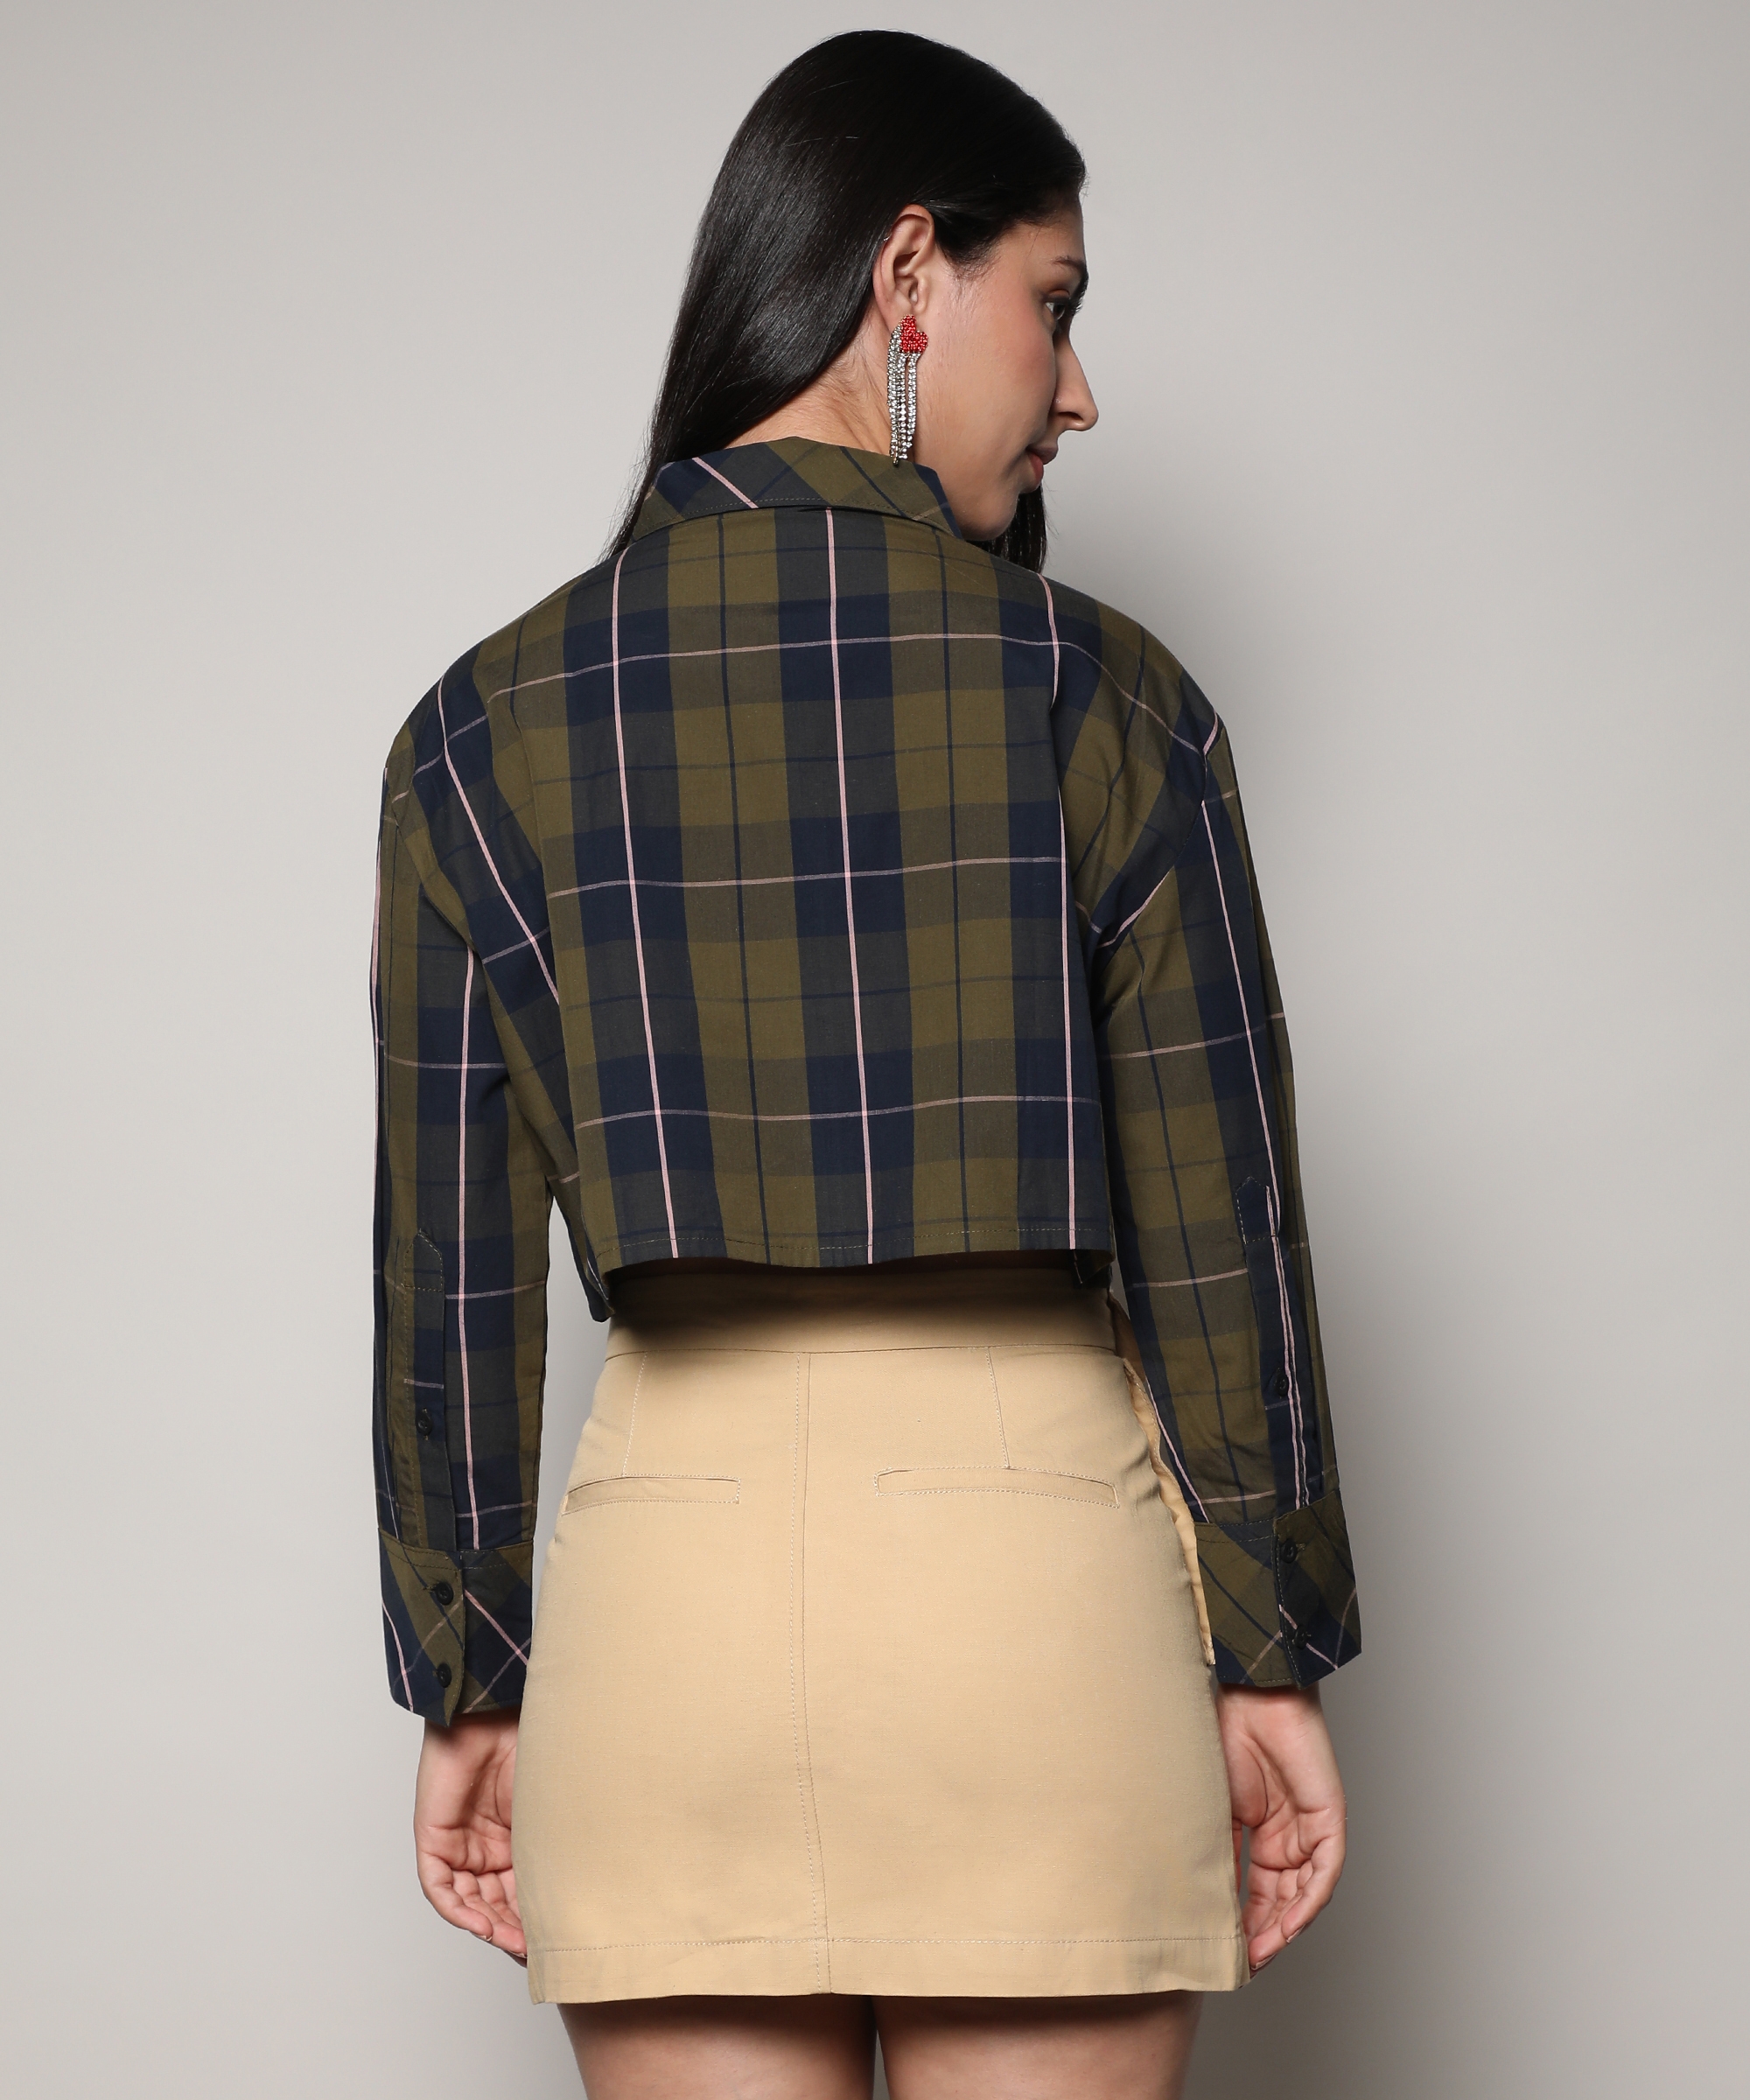 CAMPUS SUTRA | Women's Olive Green:Navy Blue Checked Crop Shirt